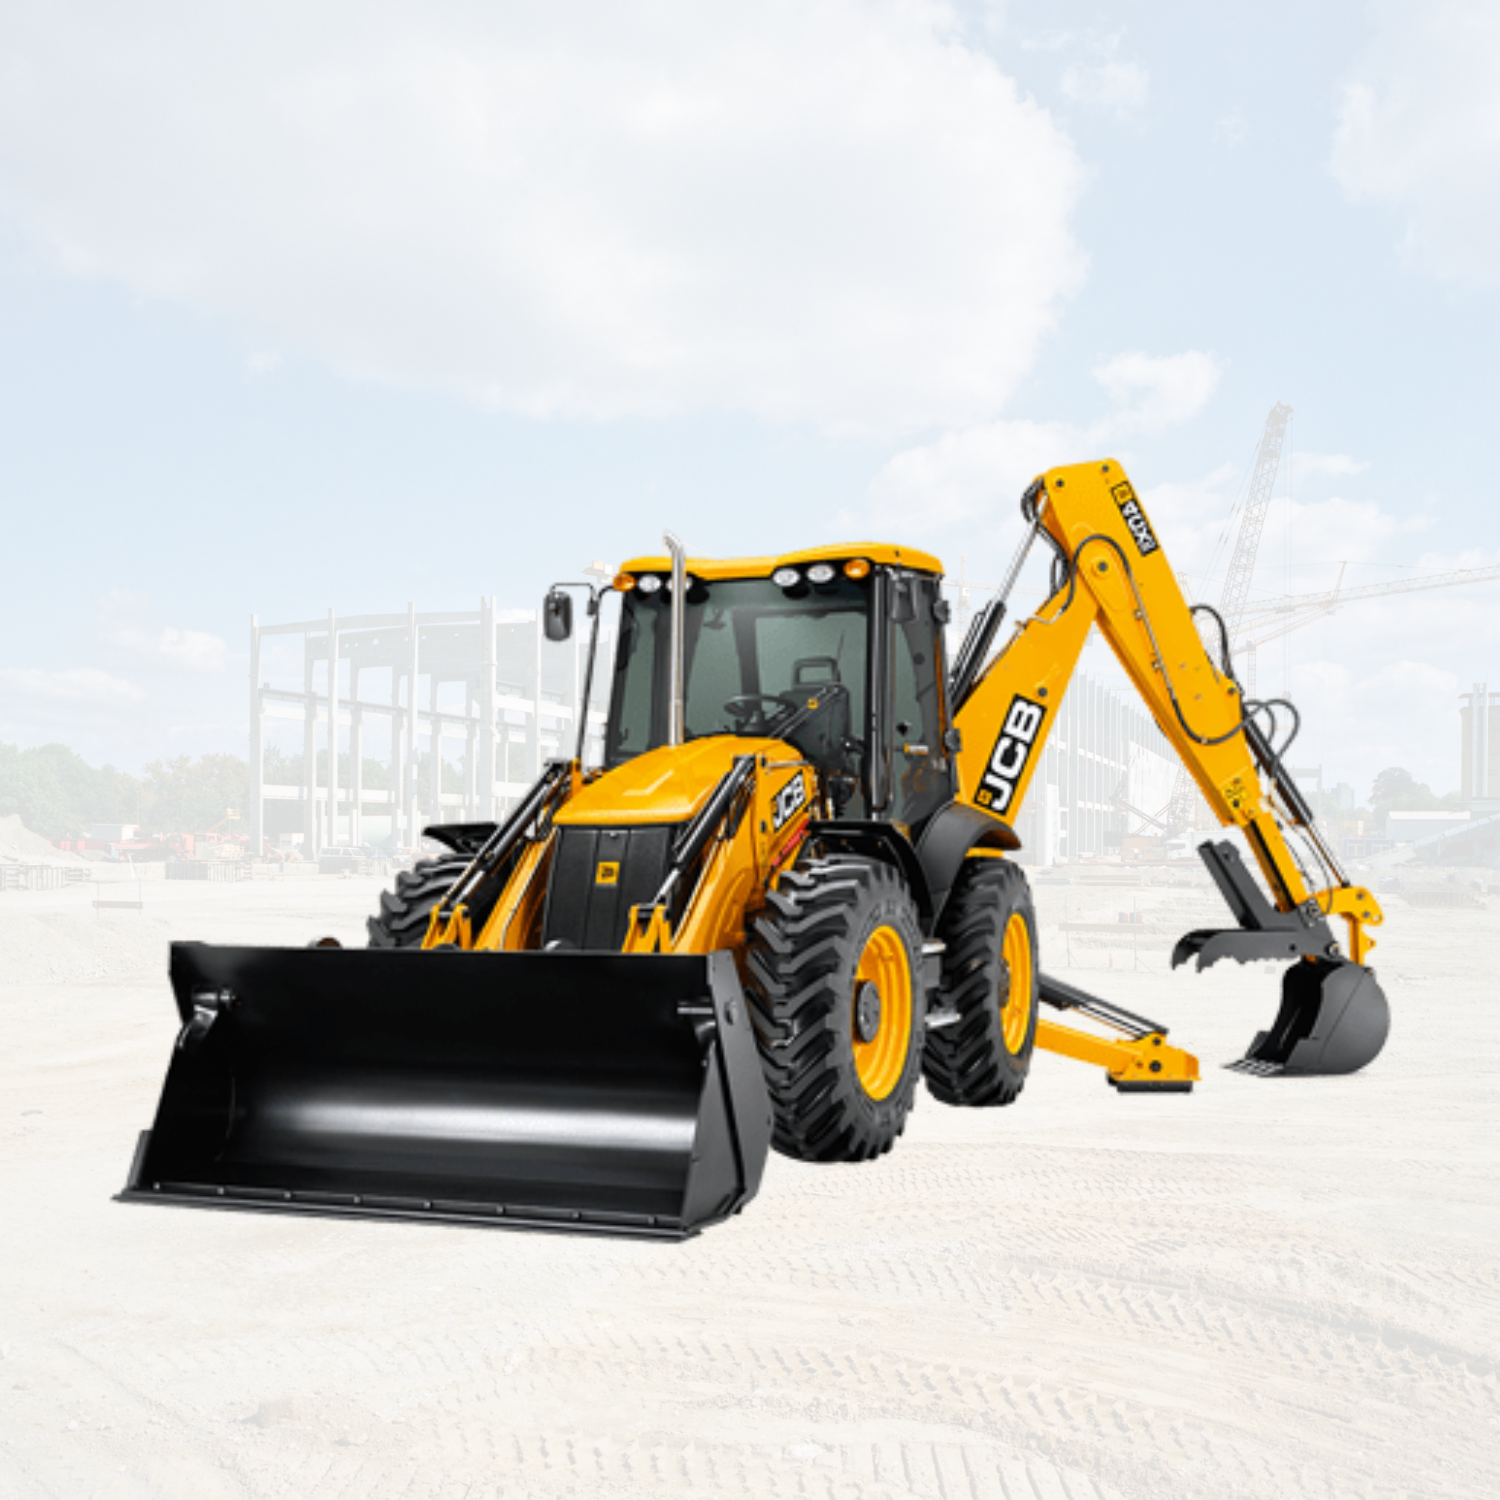 Save big on parts for your JCB